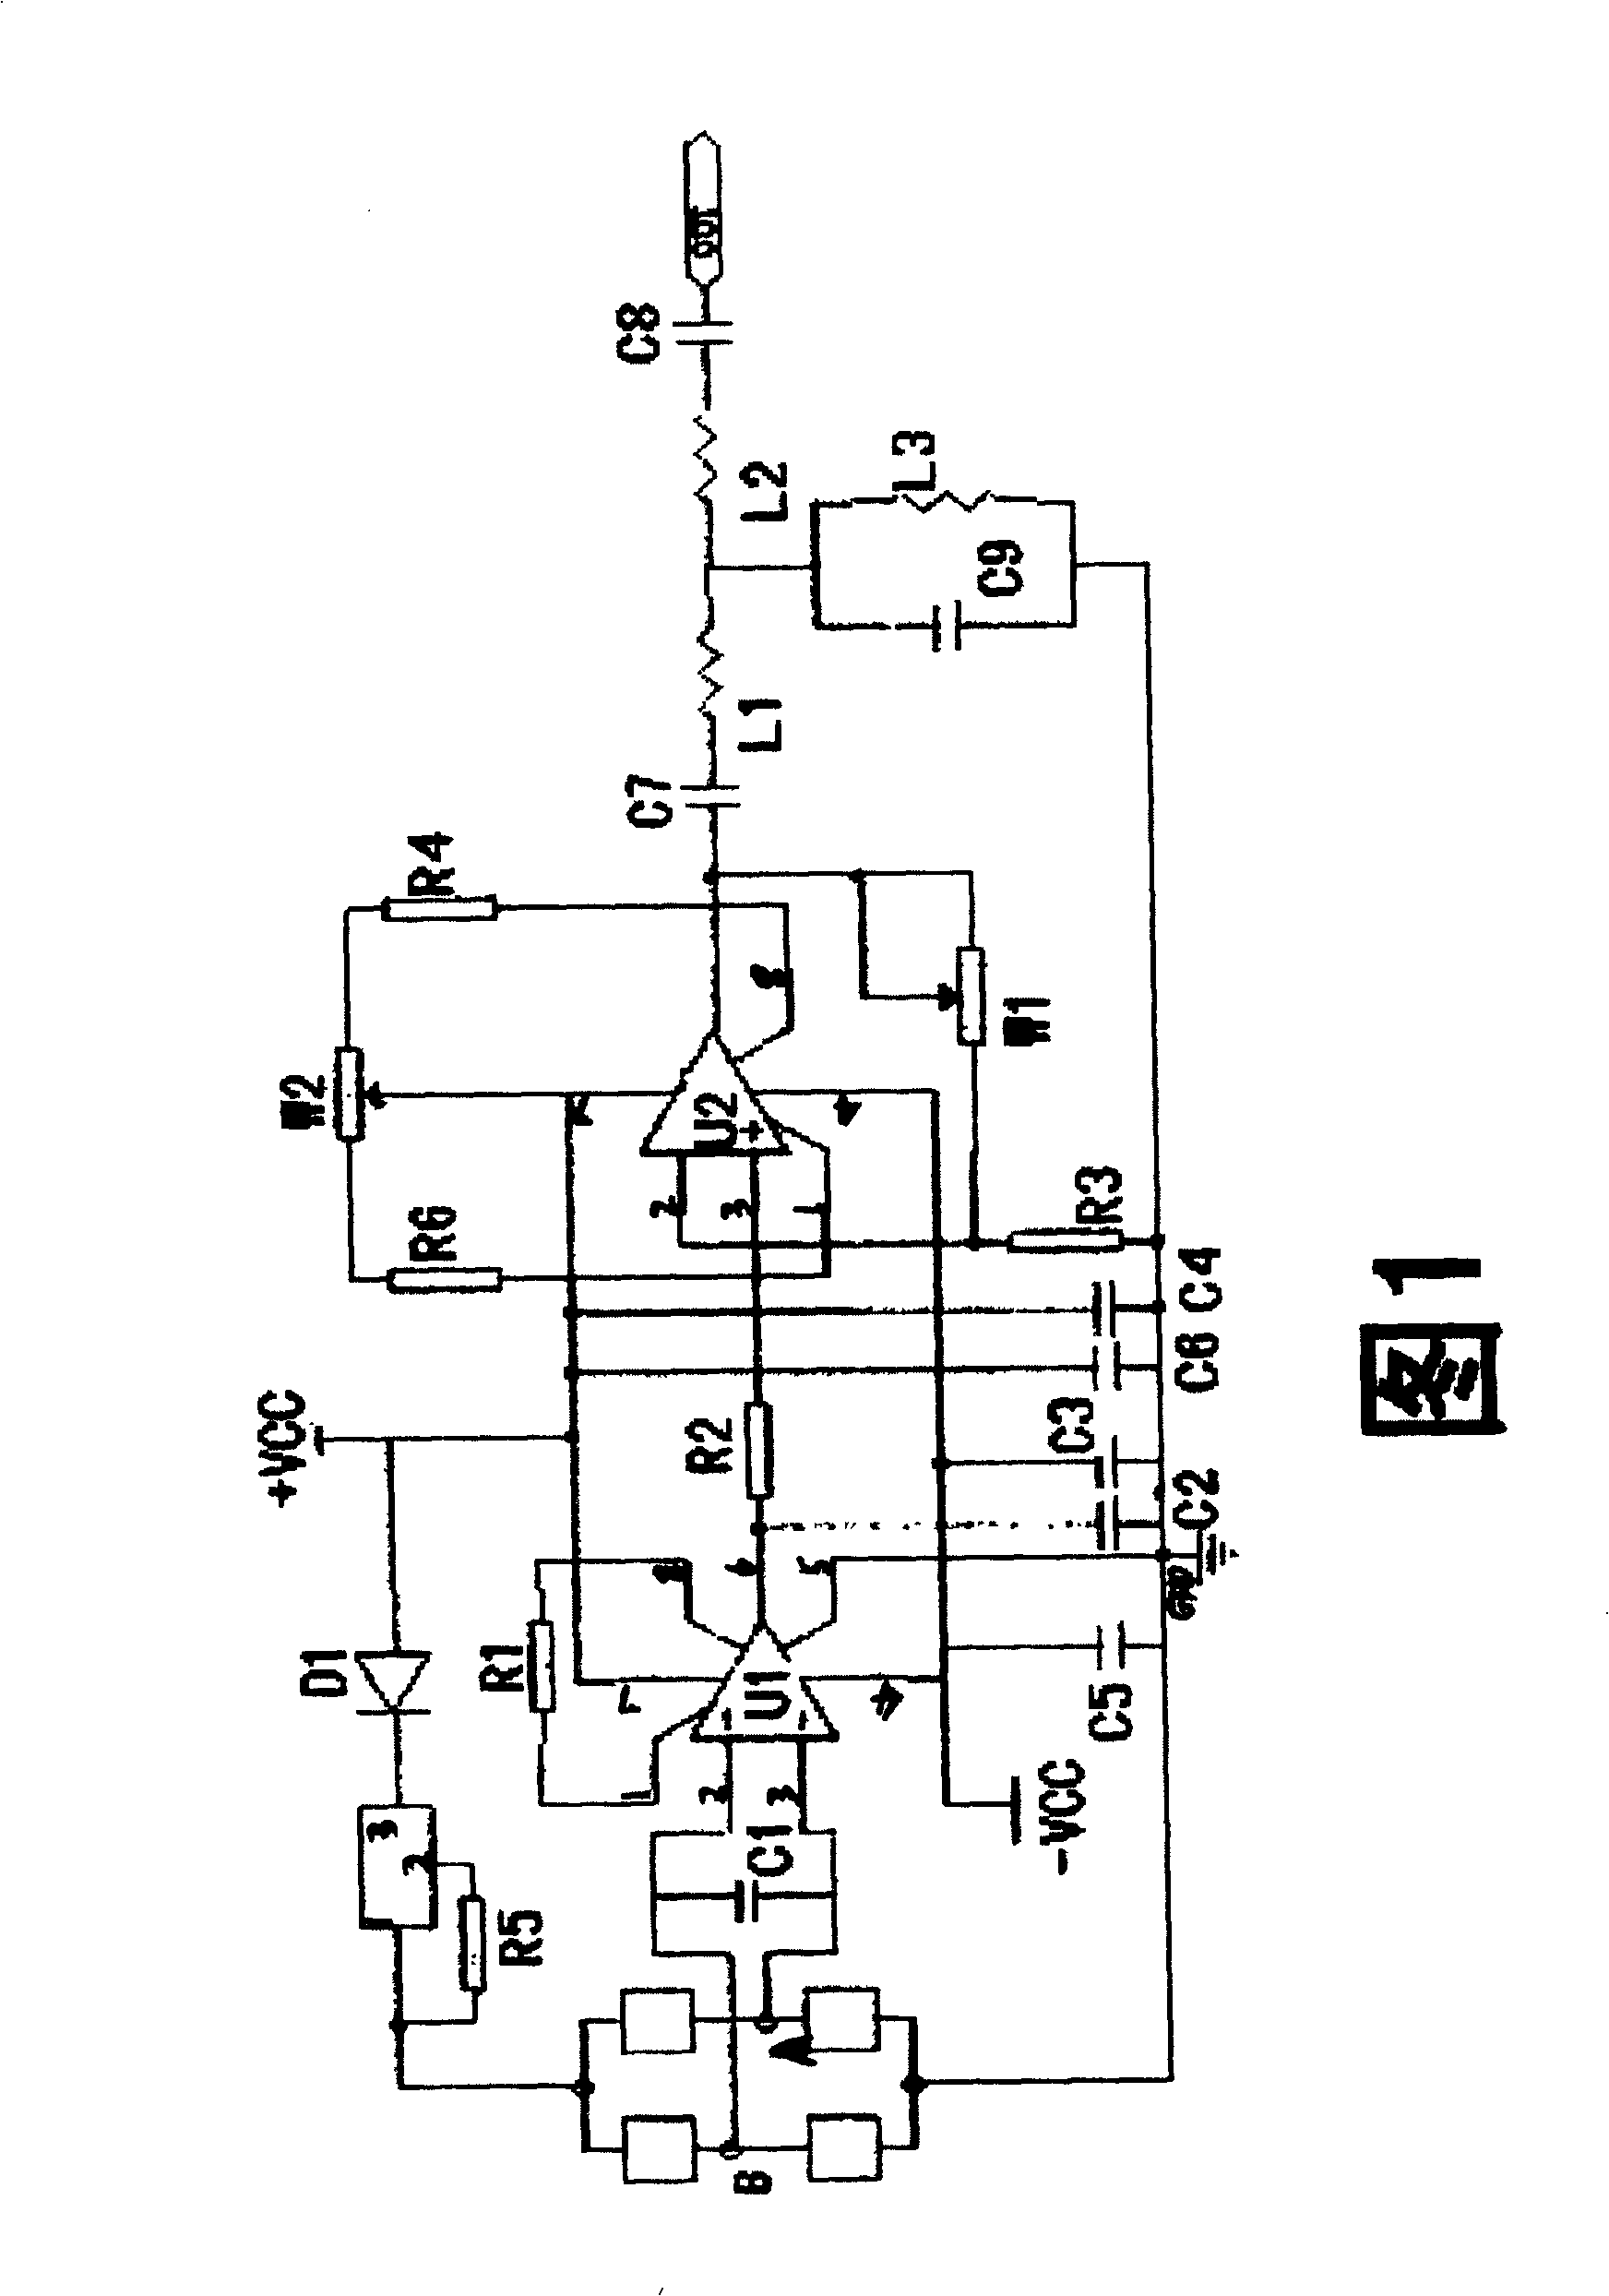 High-frequency wideband amplification circuit used for piezoresistive dynamic pressure sensor